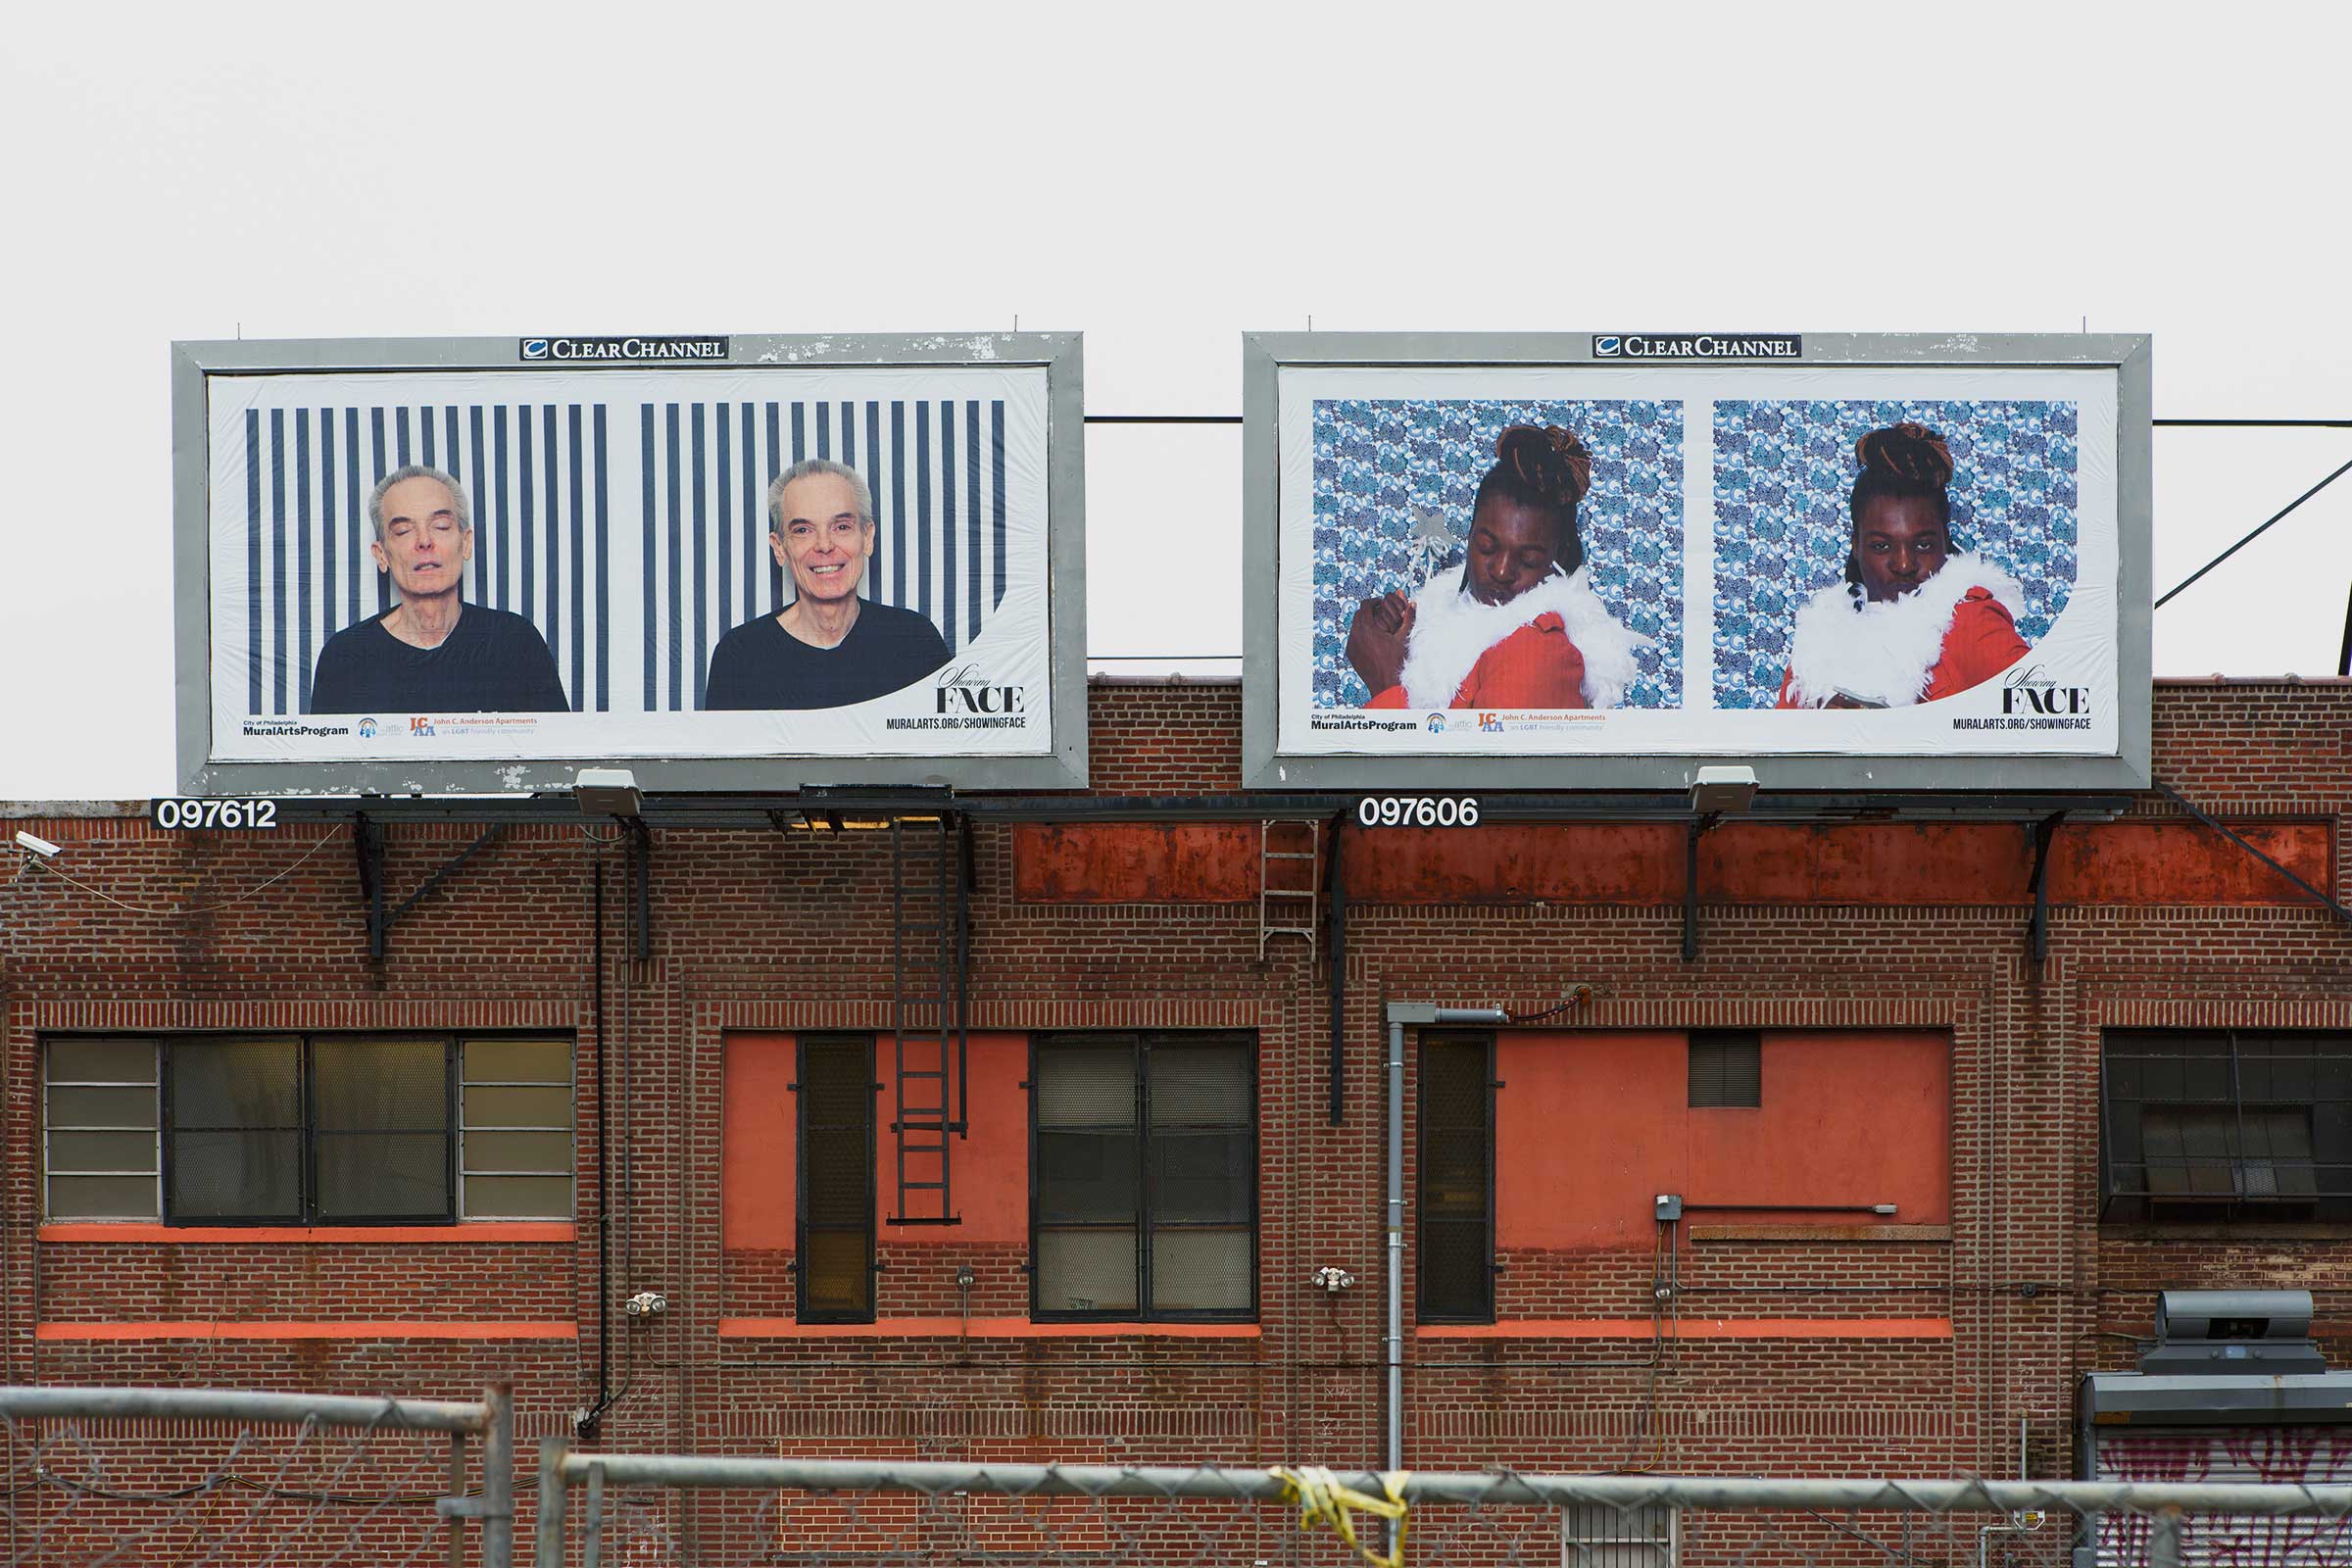 Photo of billboards showing two diptychs from Gayface